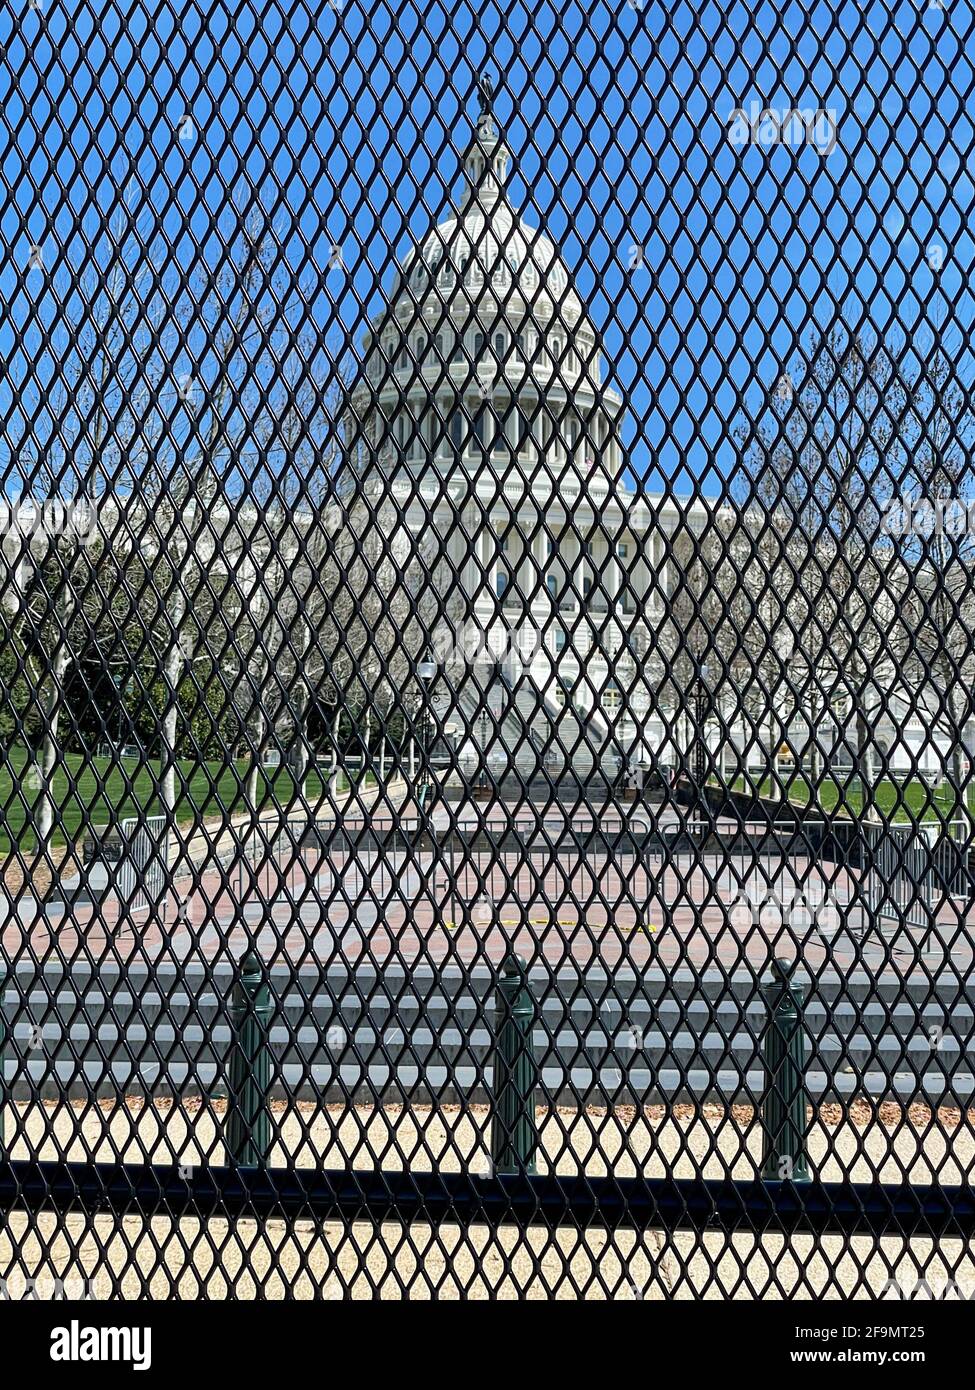 Washington, DC - Apr 3 2021: New security and fencing in place at the Nation's Capitol after the building was stormed by Trump-supporting rioters. Stock Photo